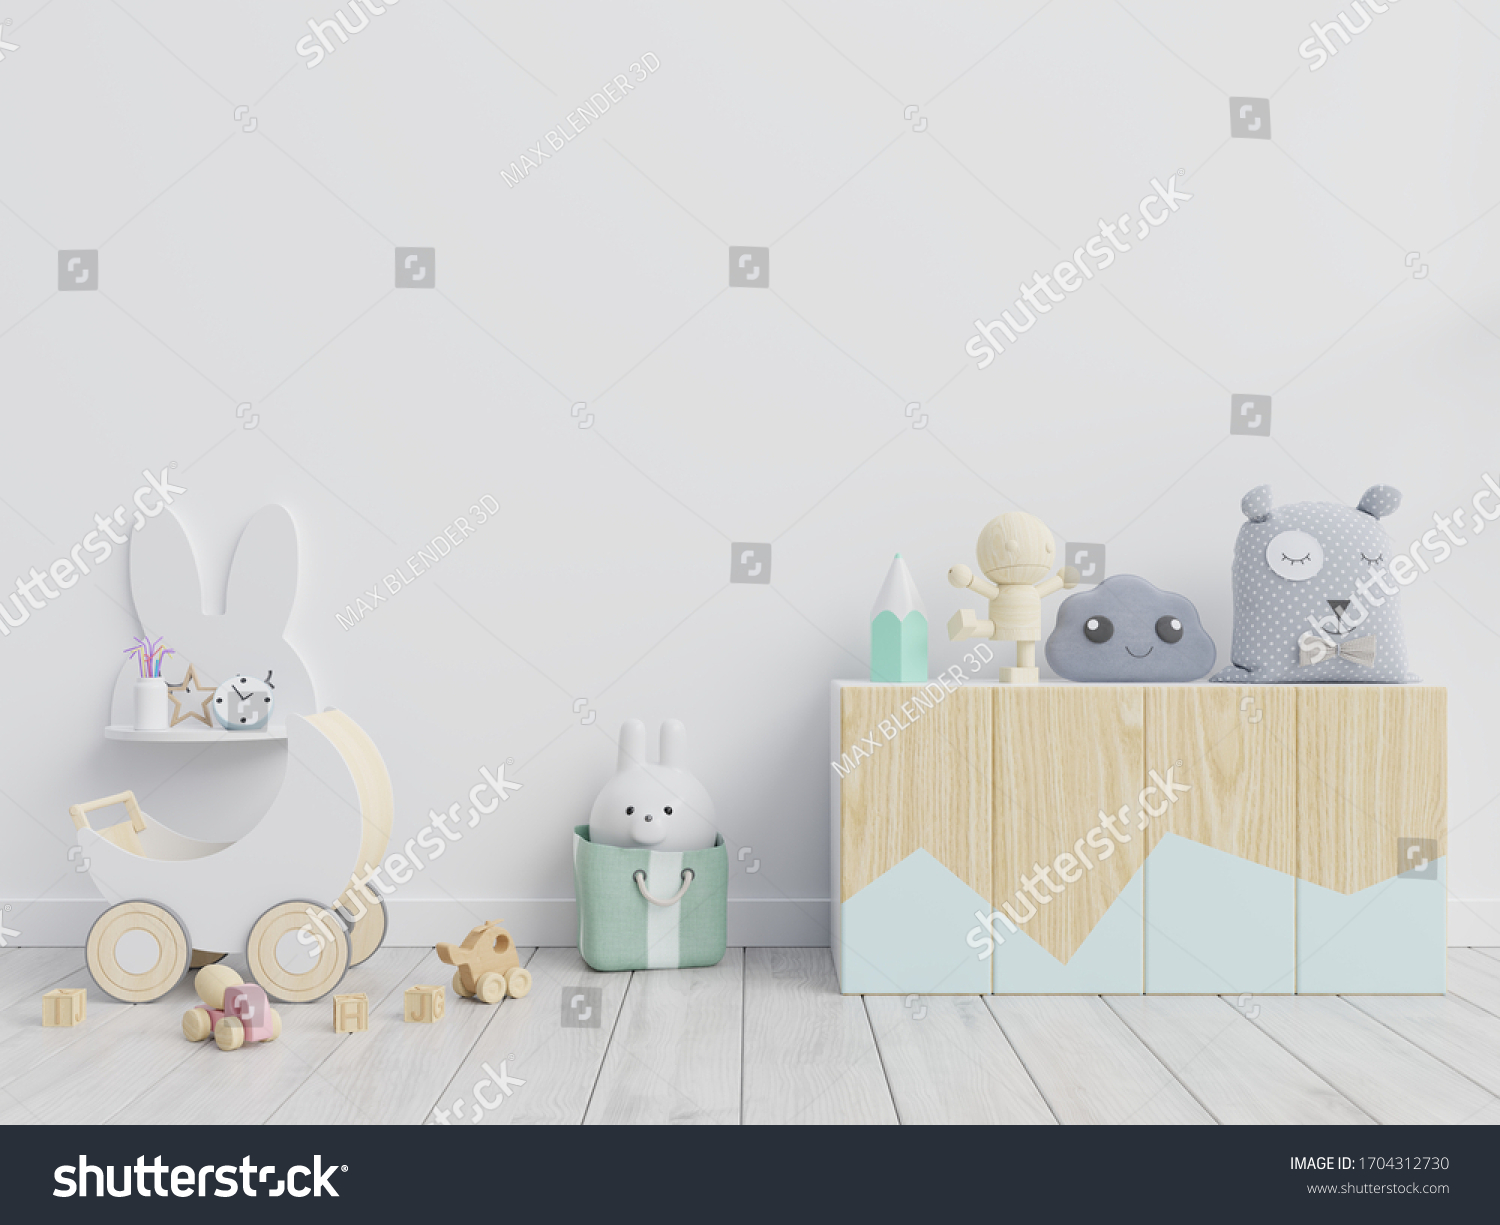 Mockup wall in the children's room on white wall  background,3d rendering #1704312730